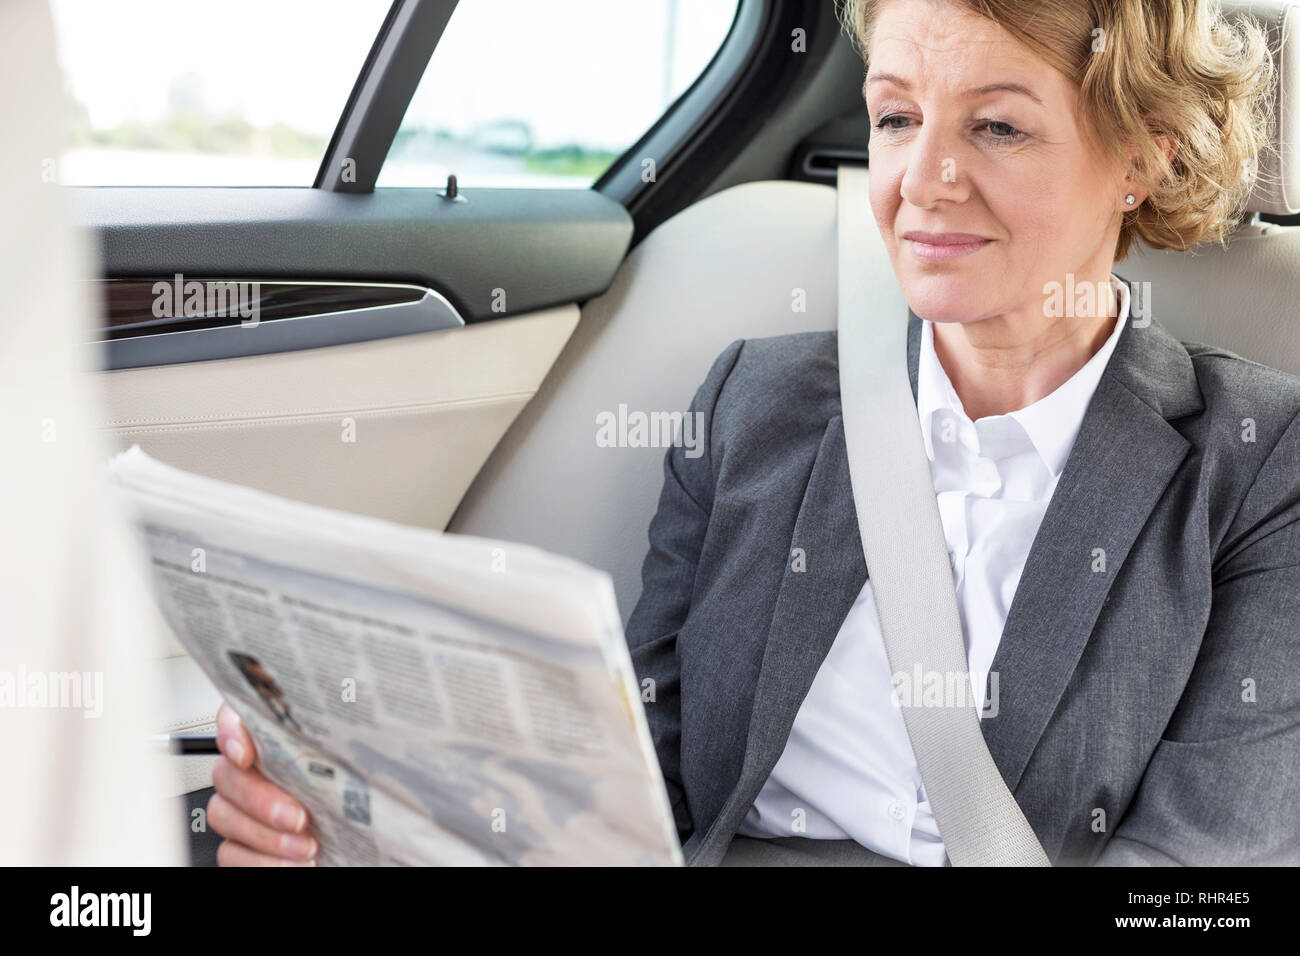 Mature businesswoman reading newspaper while sitting in car Stock Photo